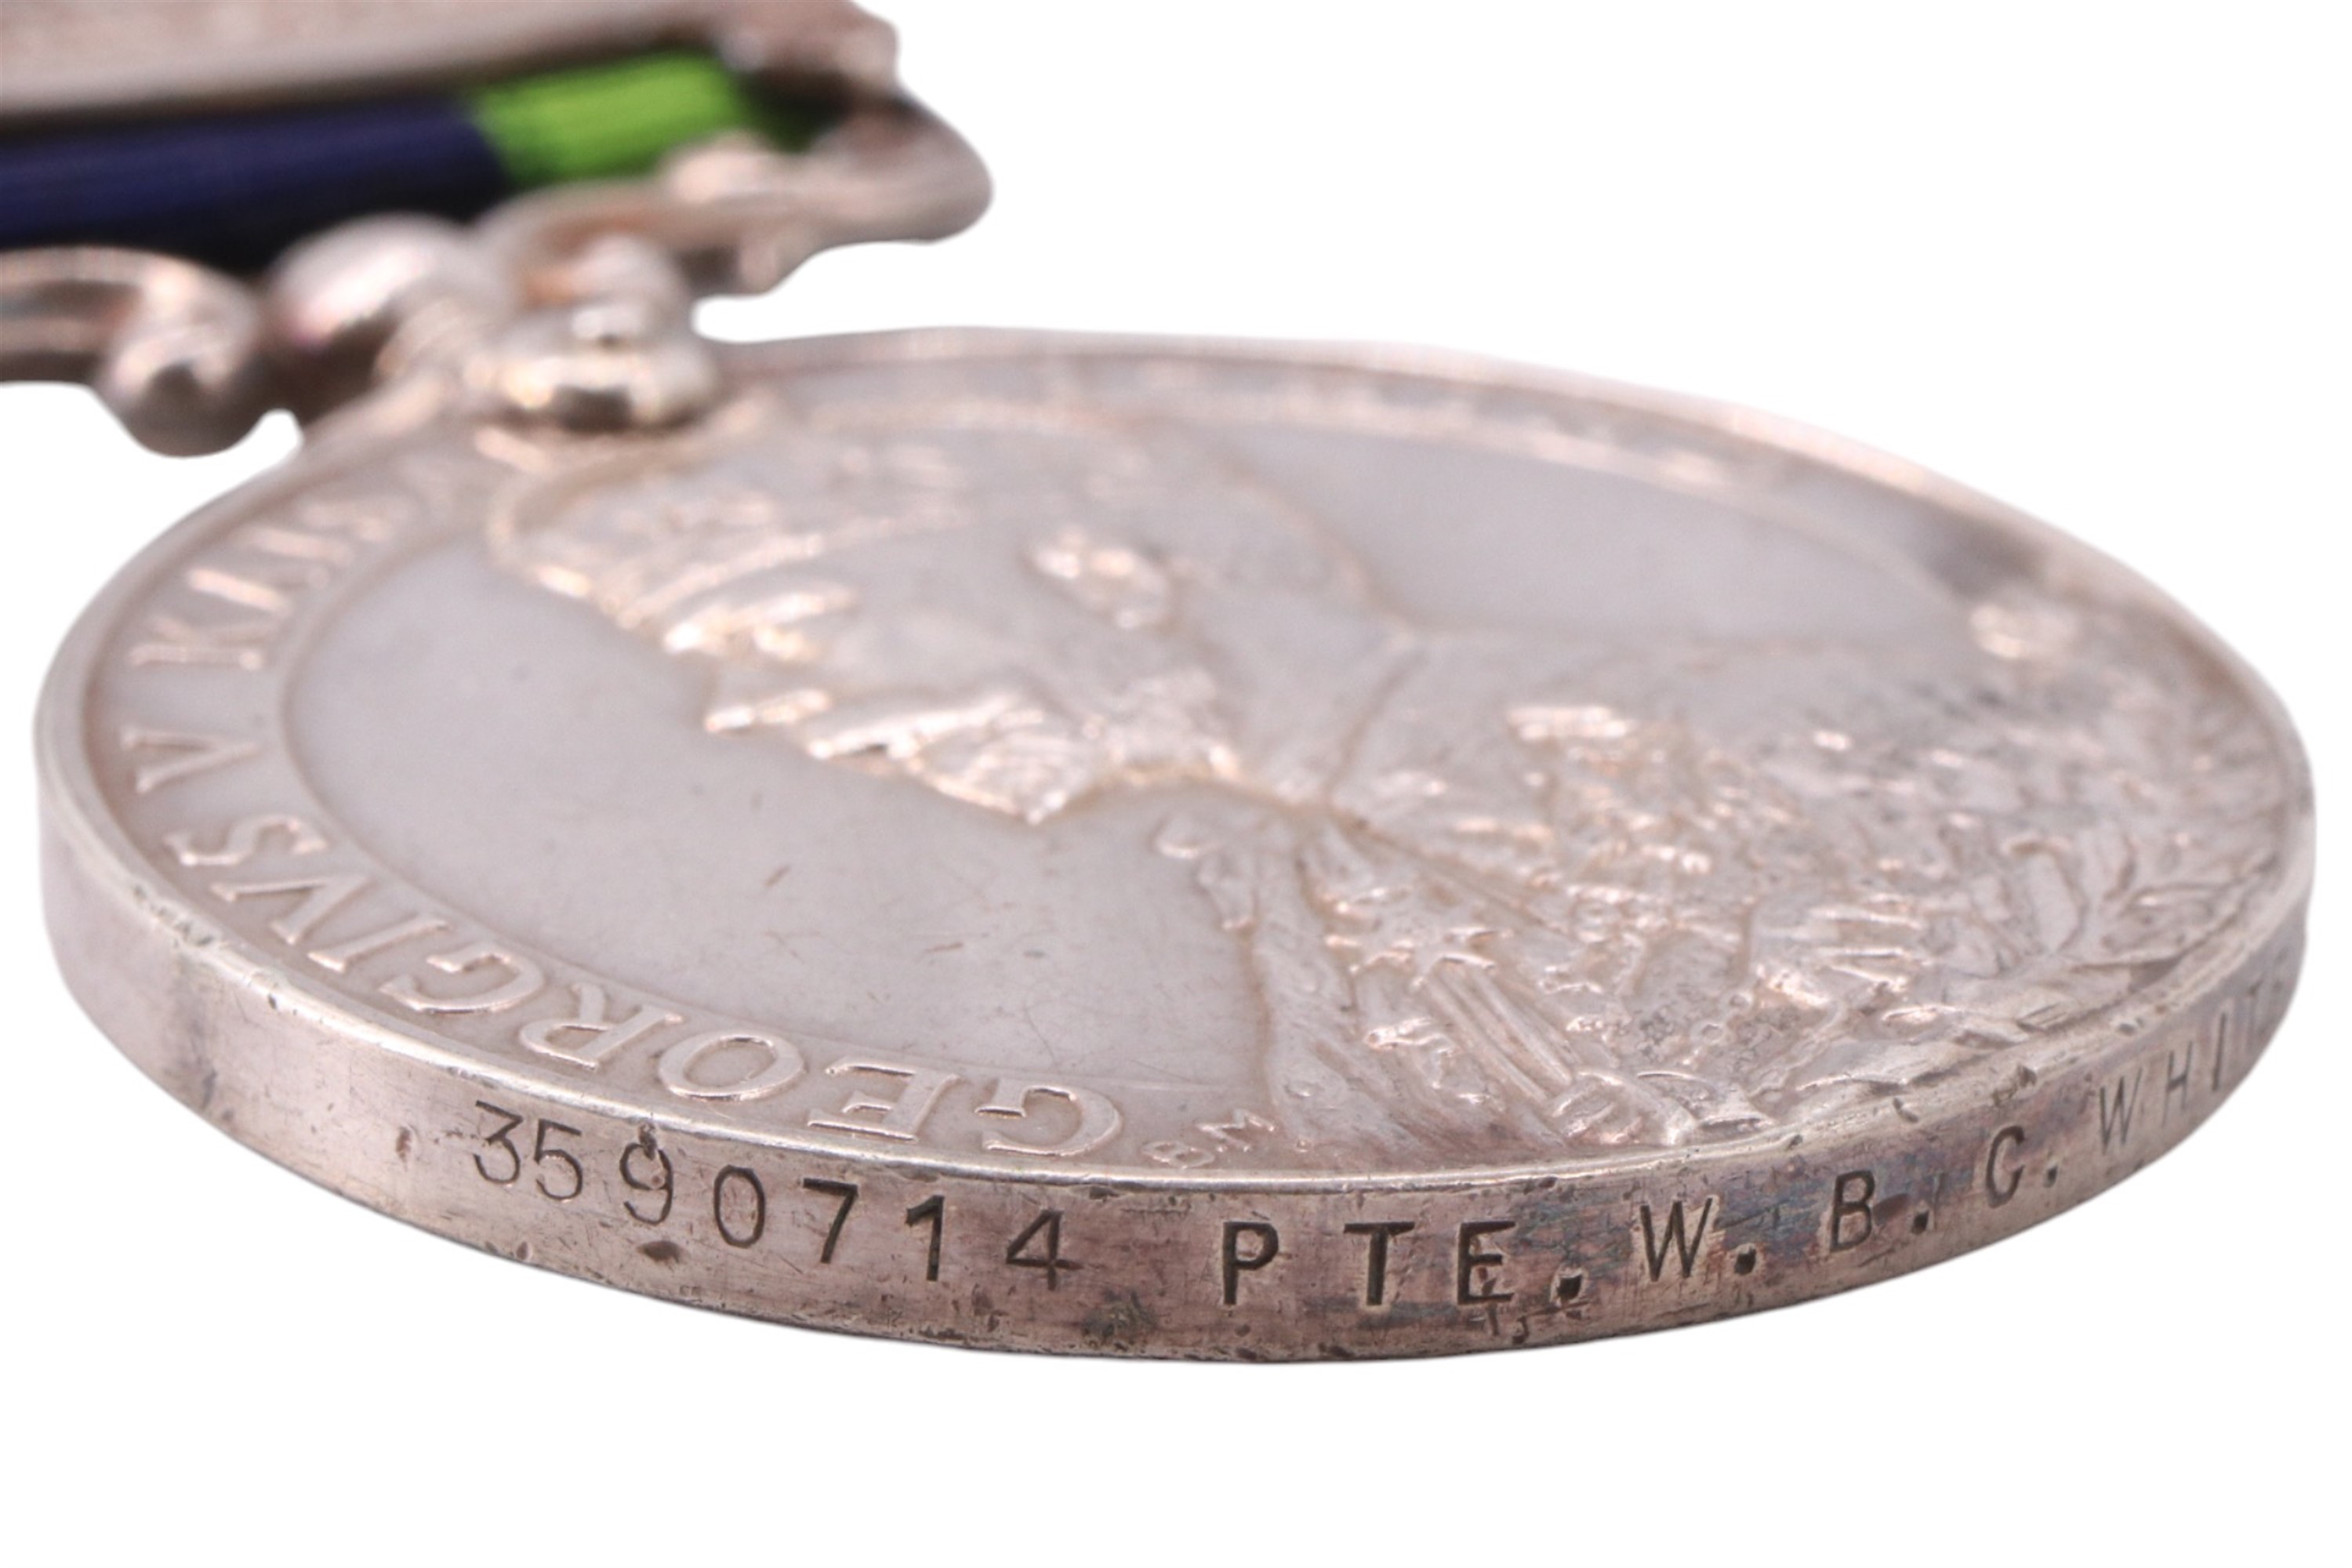 An India General Service Medal with Waziristan 1921-24 clasp to 3590714 Pte W B C White, Border - Image 3 of 4